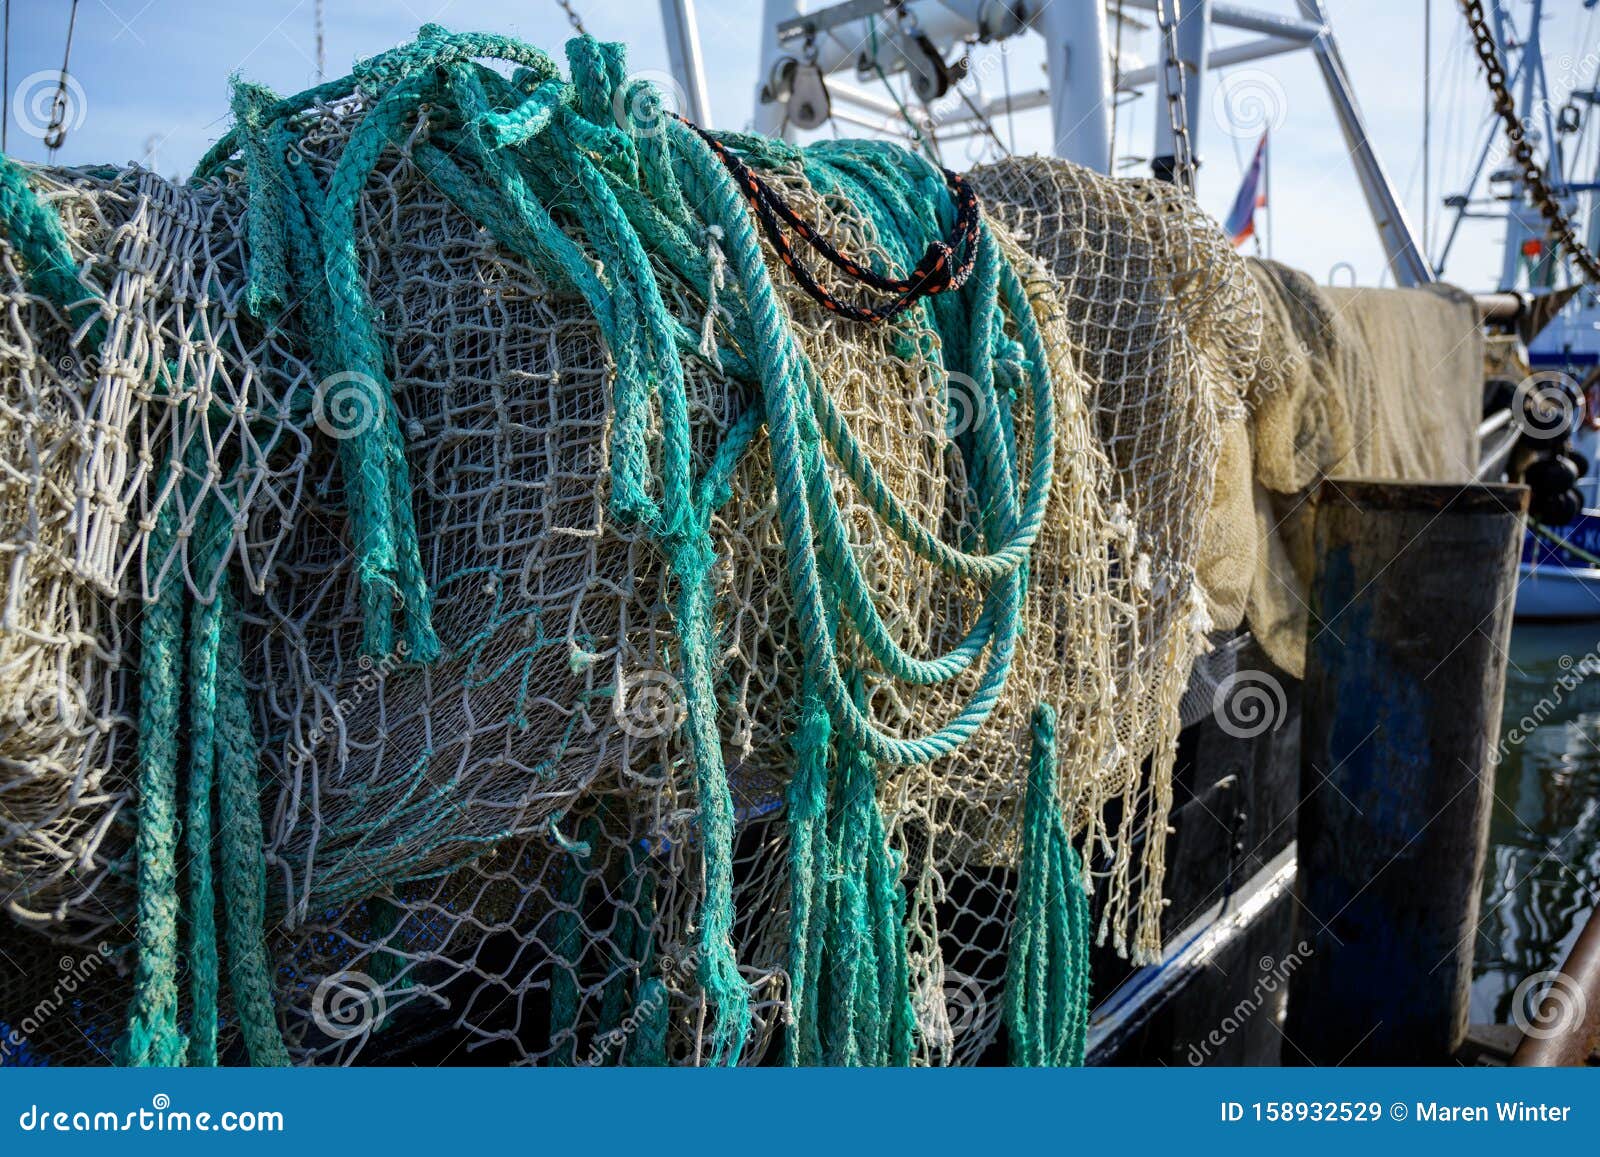 Nets and Ropes, Equipment on a Fishing Boat in the Harbor Stock